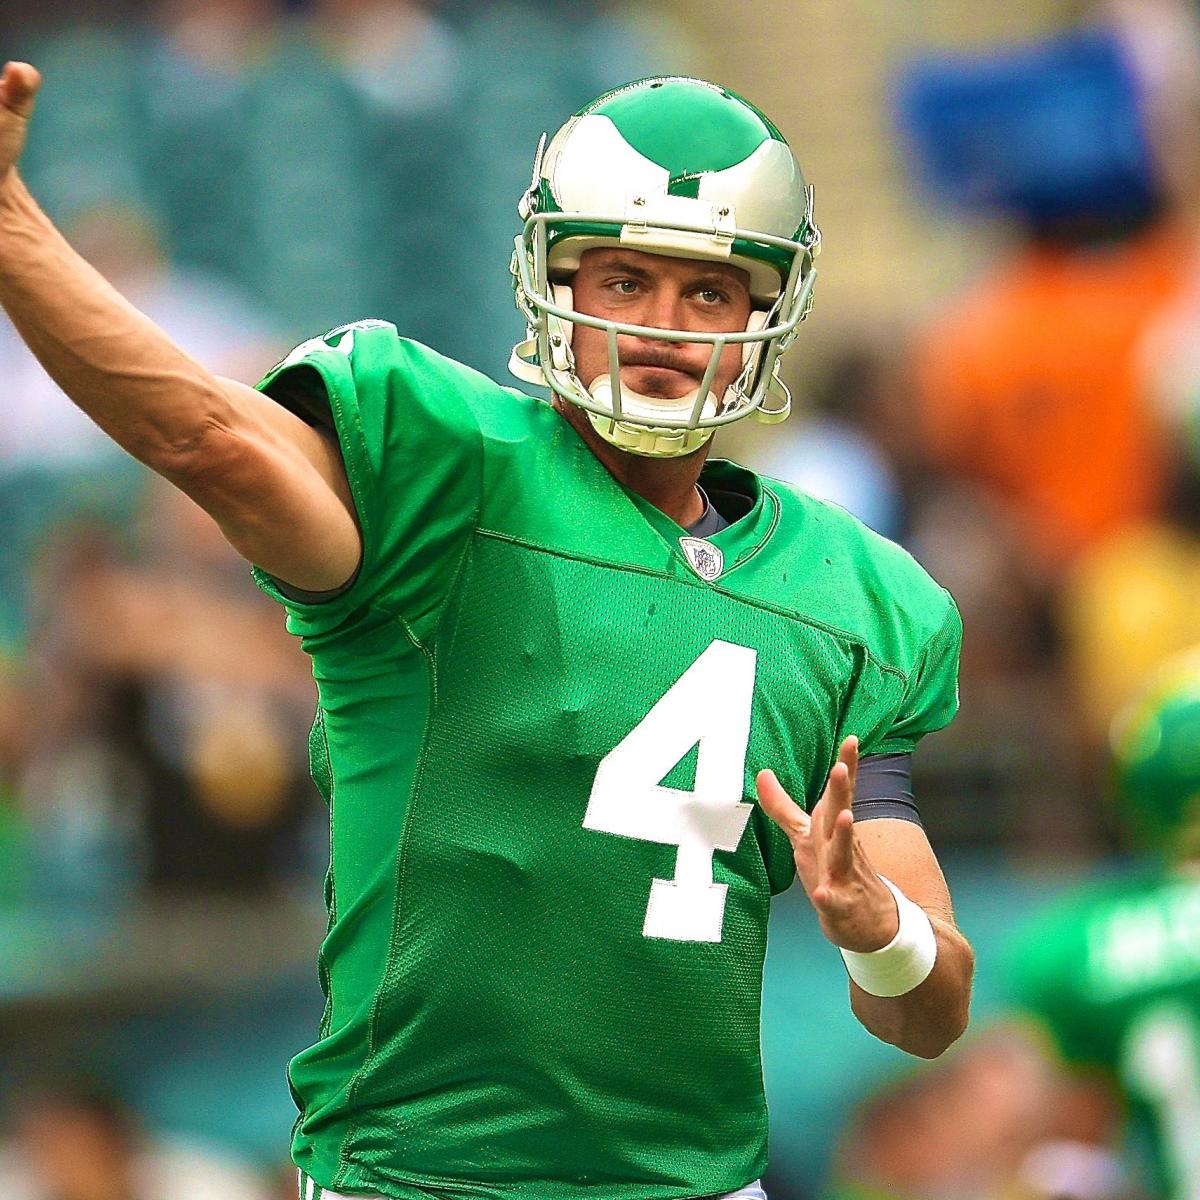 At last: Eagles will wear their old kelly green uniforms this